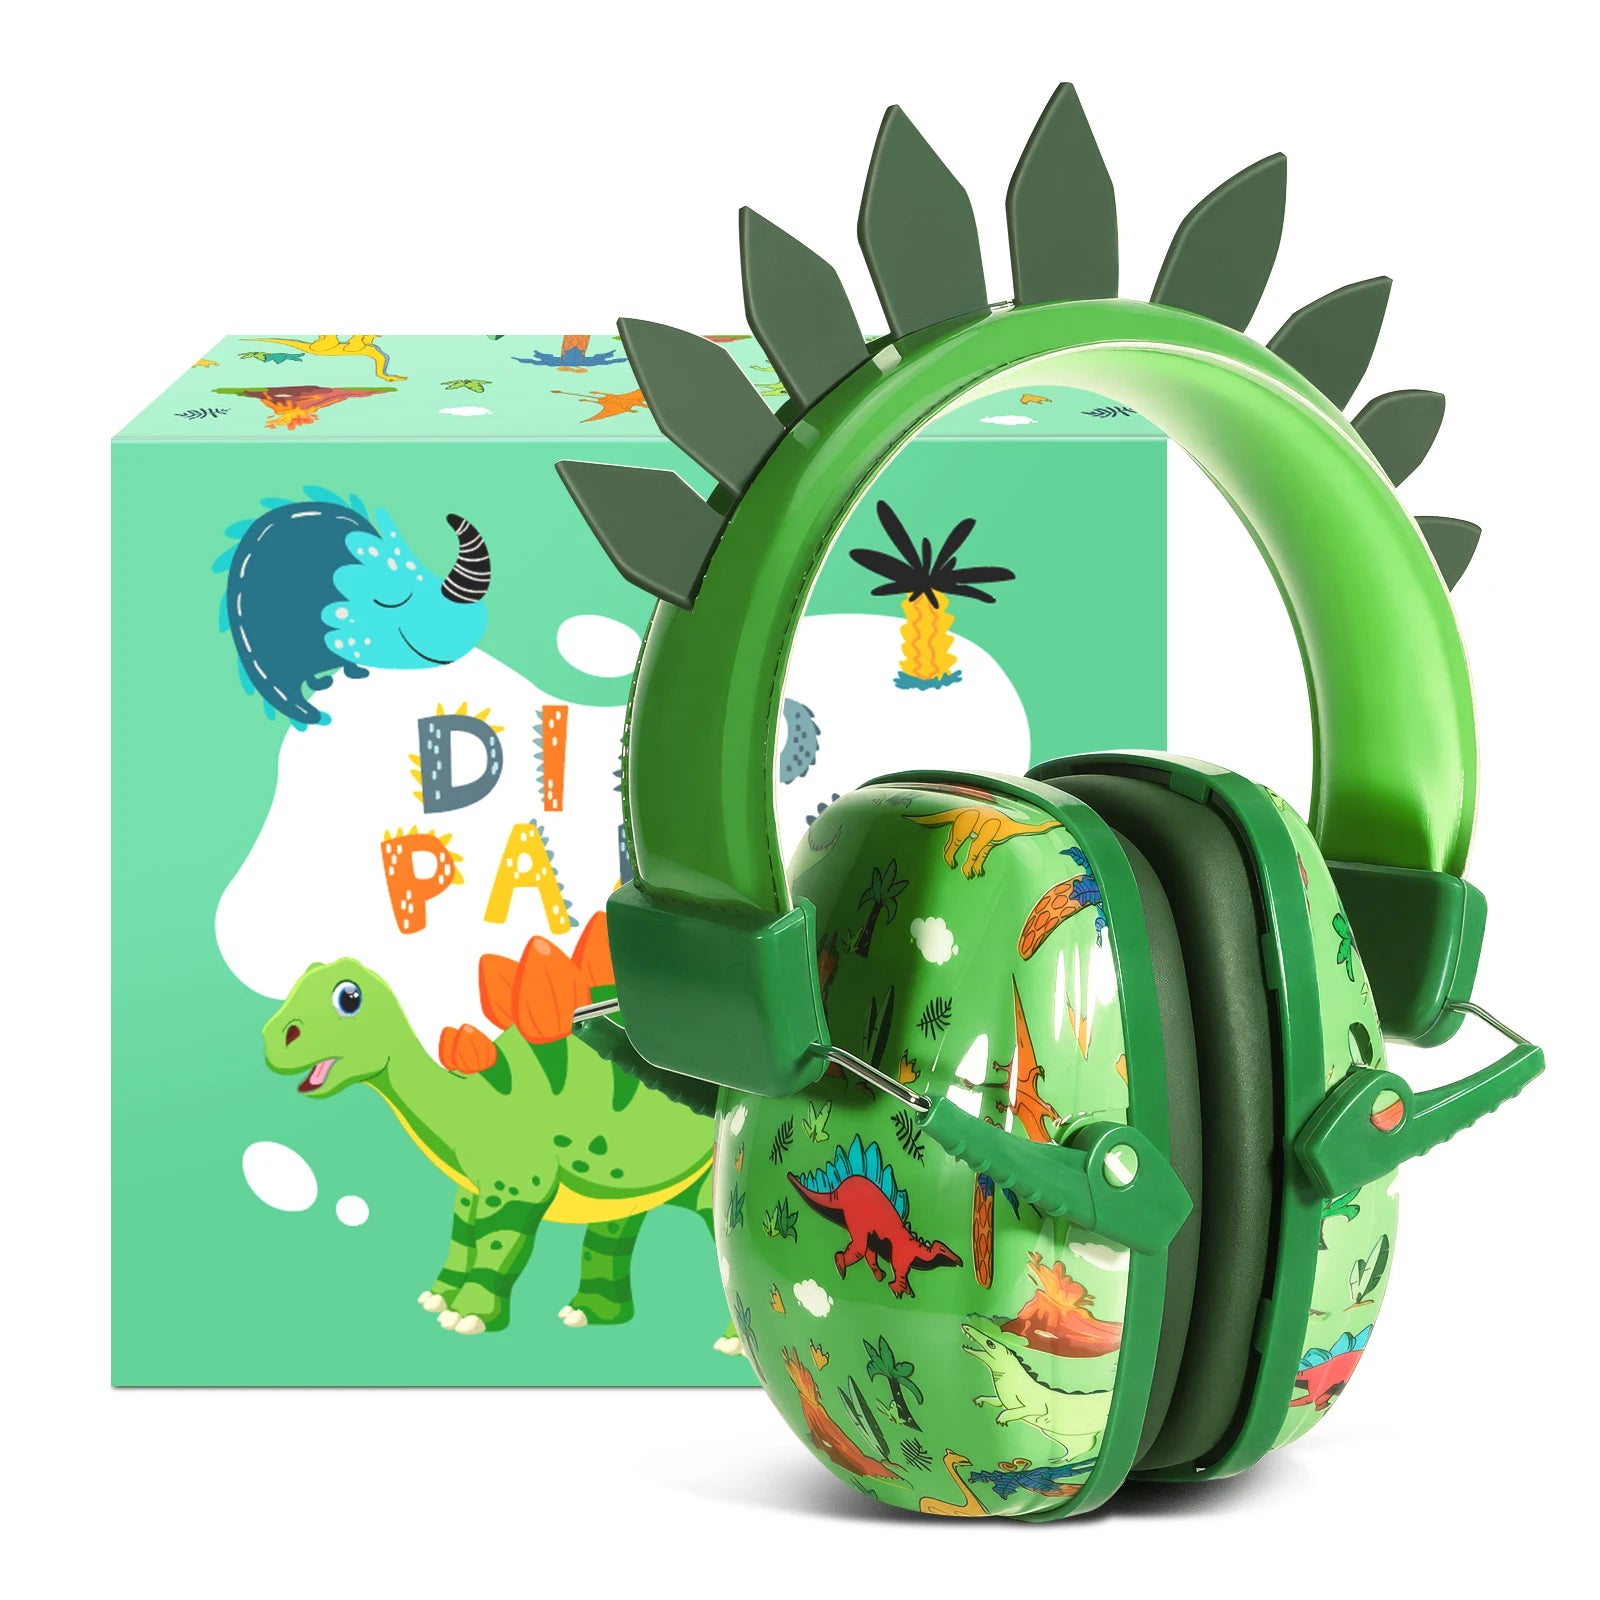 New Kid Earmuffs - Safety Ear Protectors for Children, 22dB Noise Protection, Noise Cancelling Headphones, Kids Gifts Dinasour with box